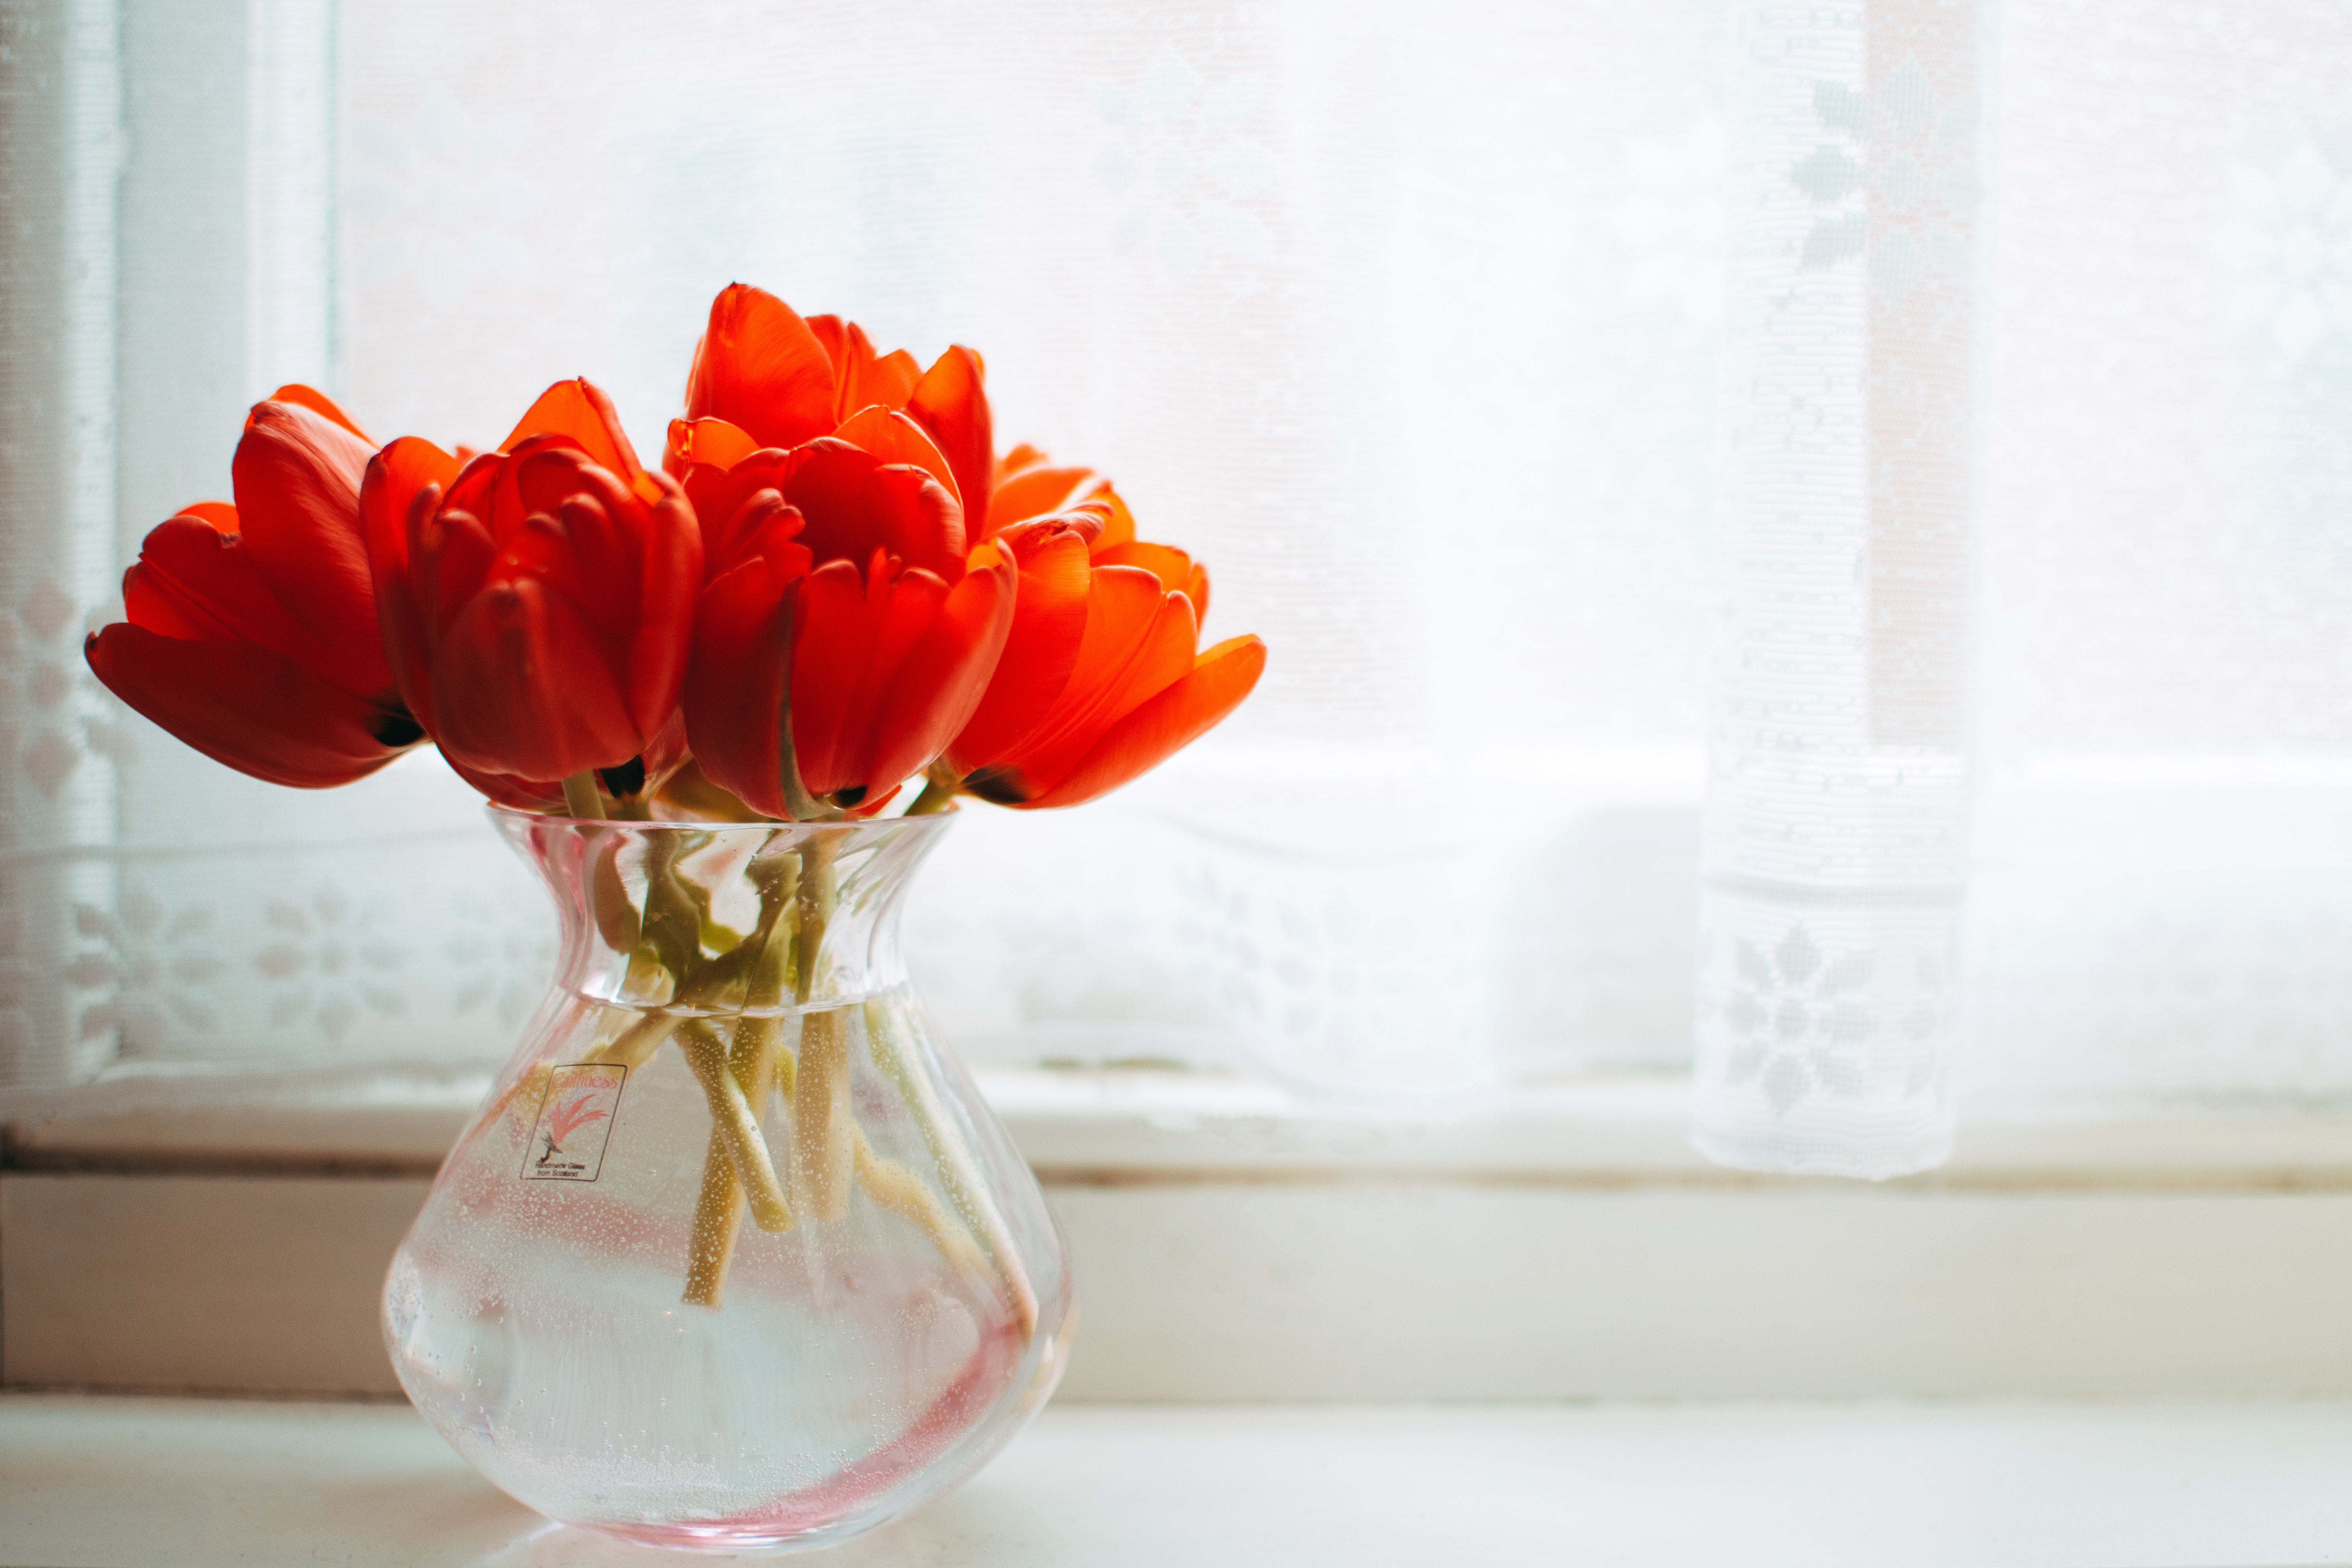 Red tulips in clear glass vase with water centerpiece near white curtain photo